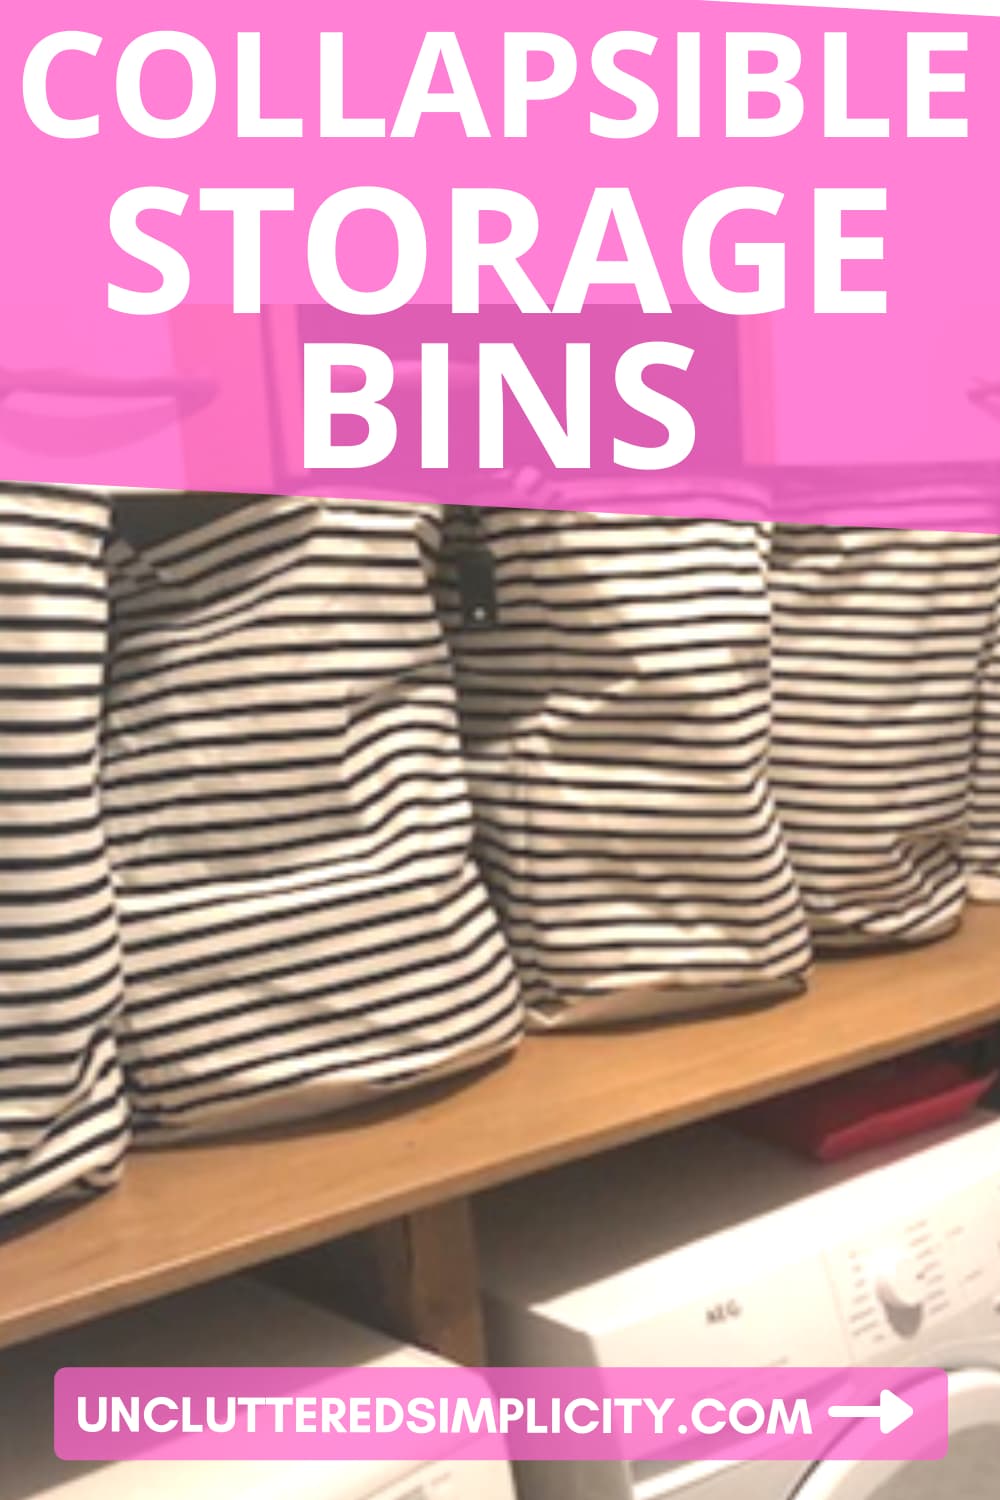 organizing products collapsible bins